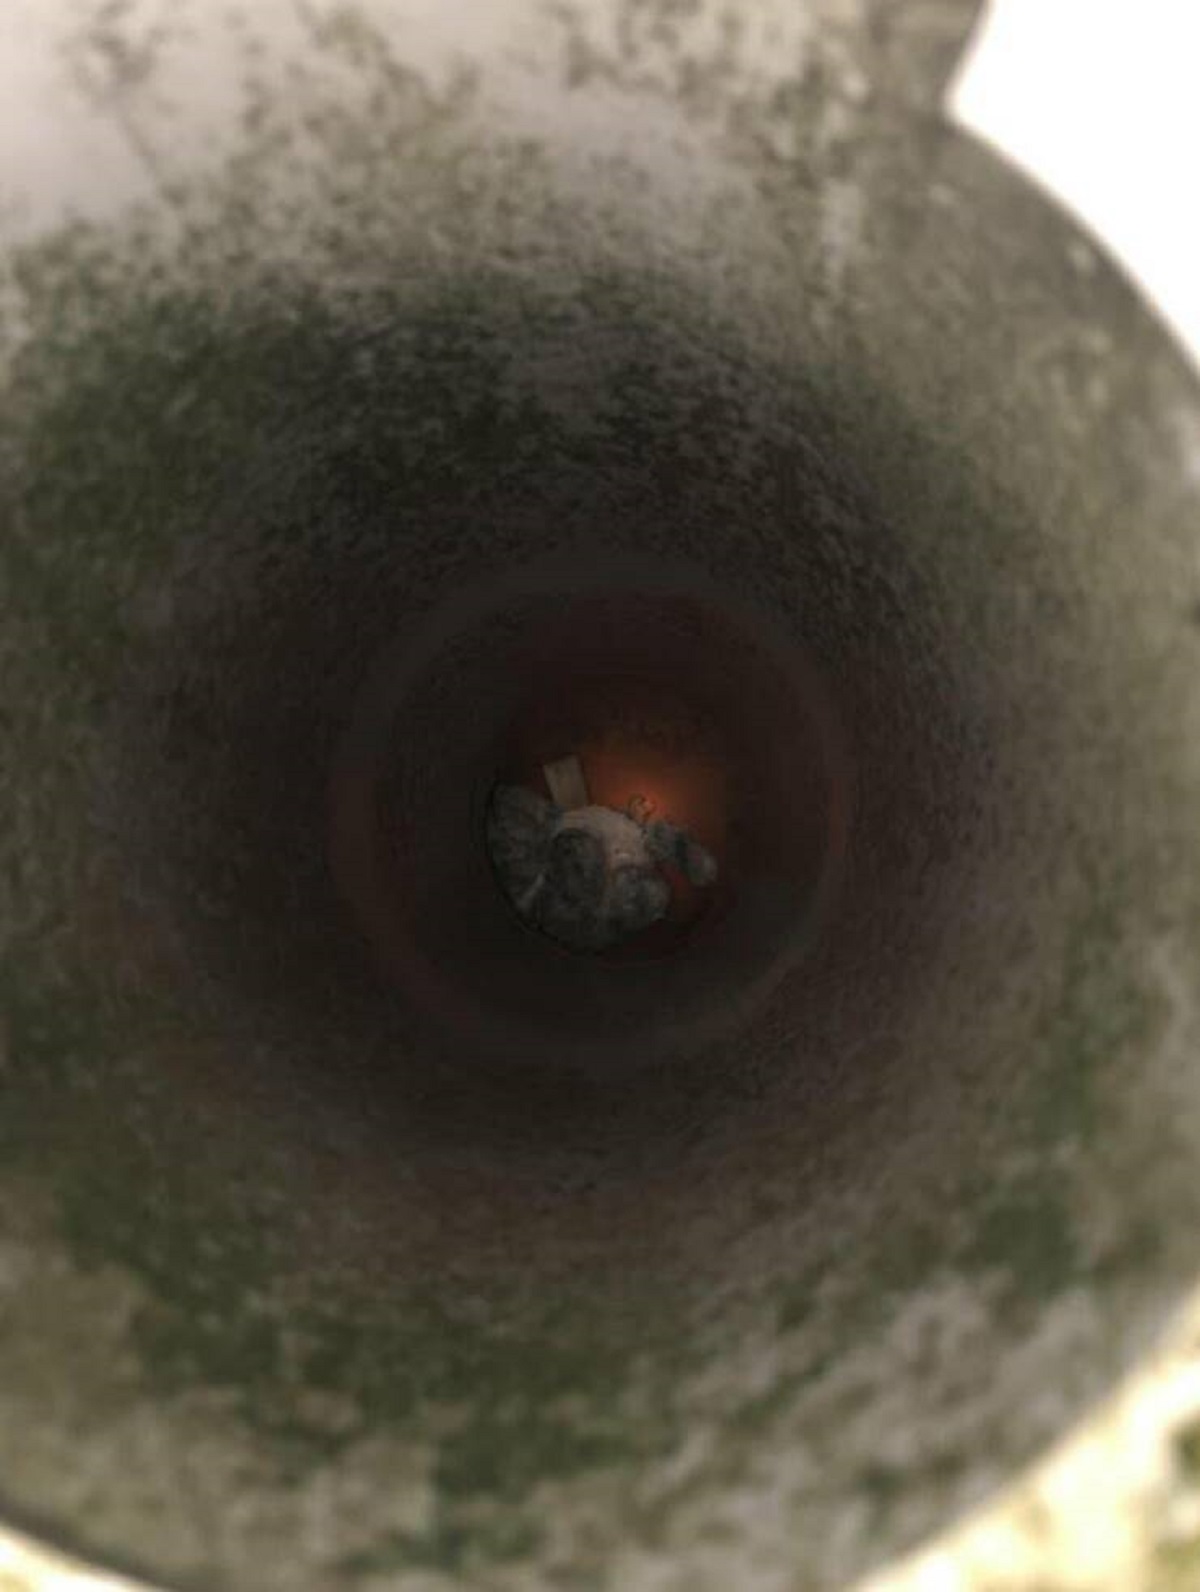 This parent discovered their child dropped her favorite toy down a drainpipe: